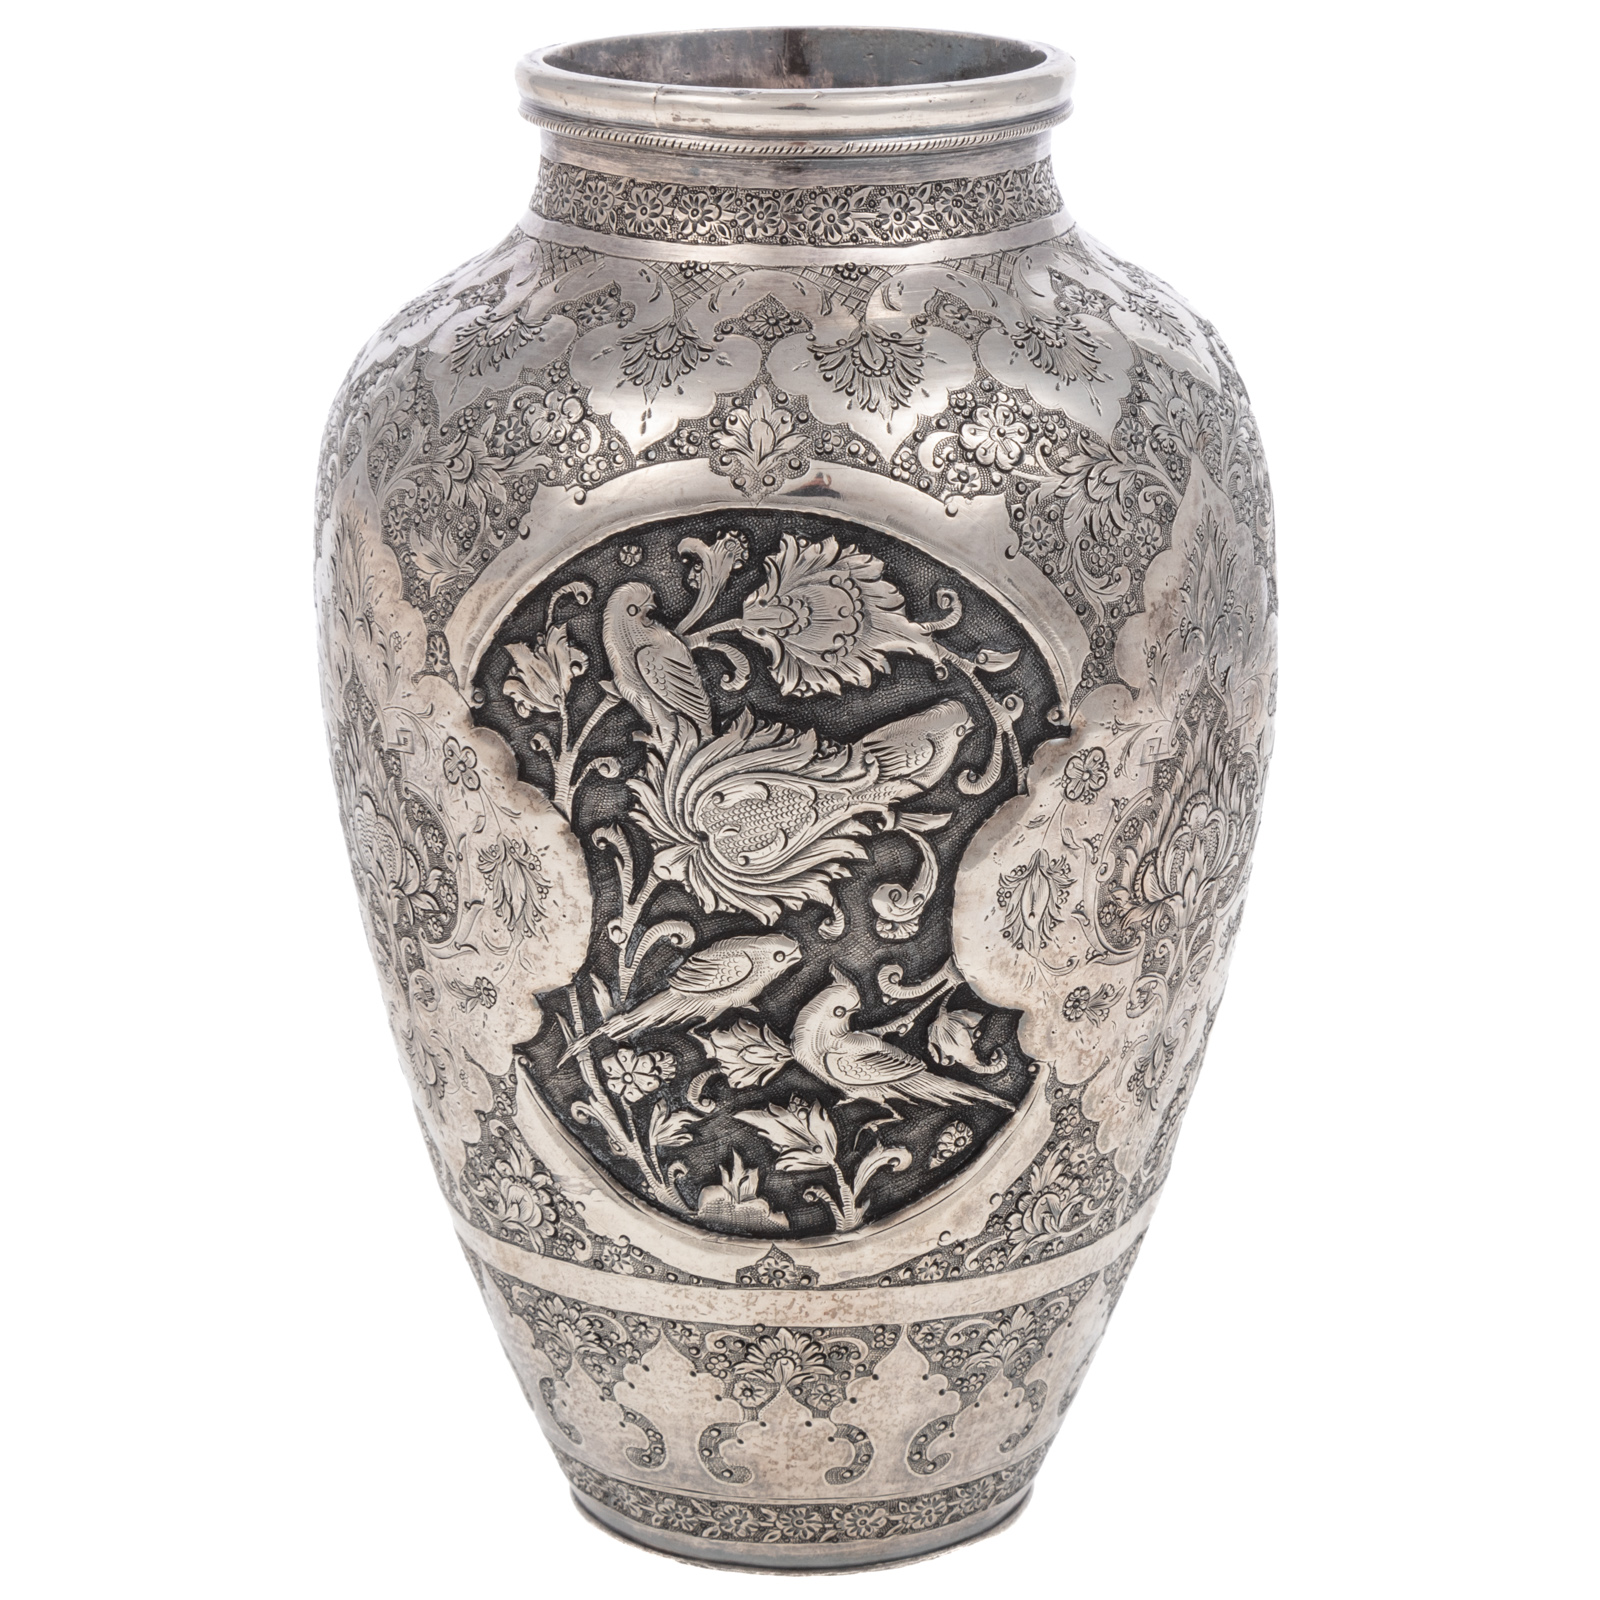 PERSIAN SILVER VASE Early to mid 20th 2ea770